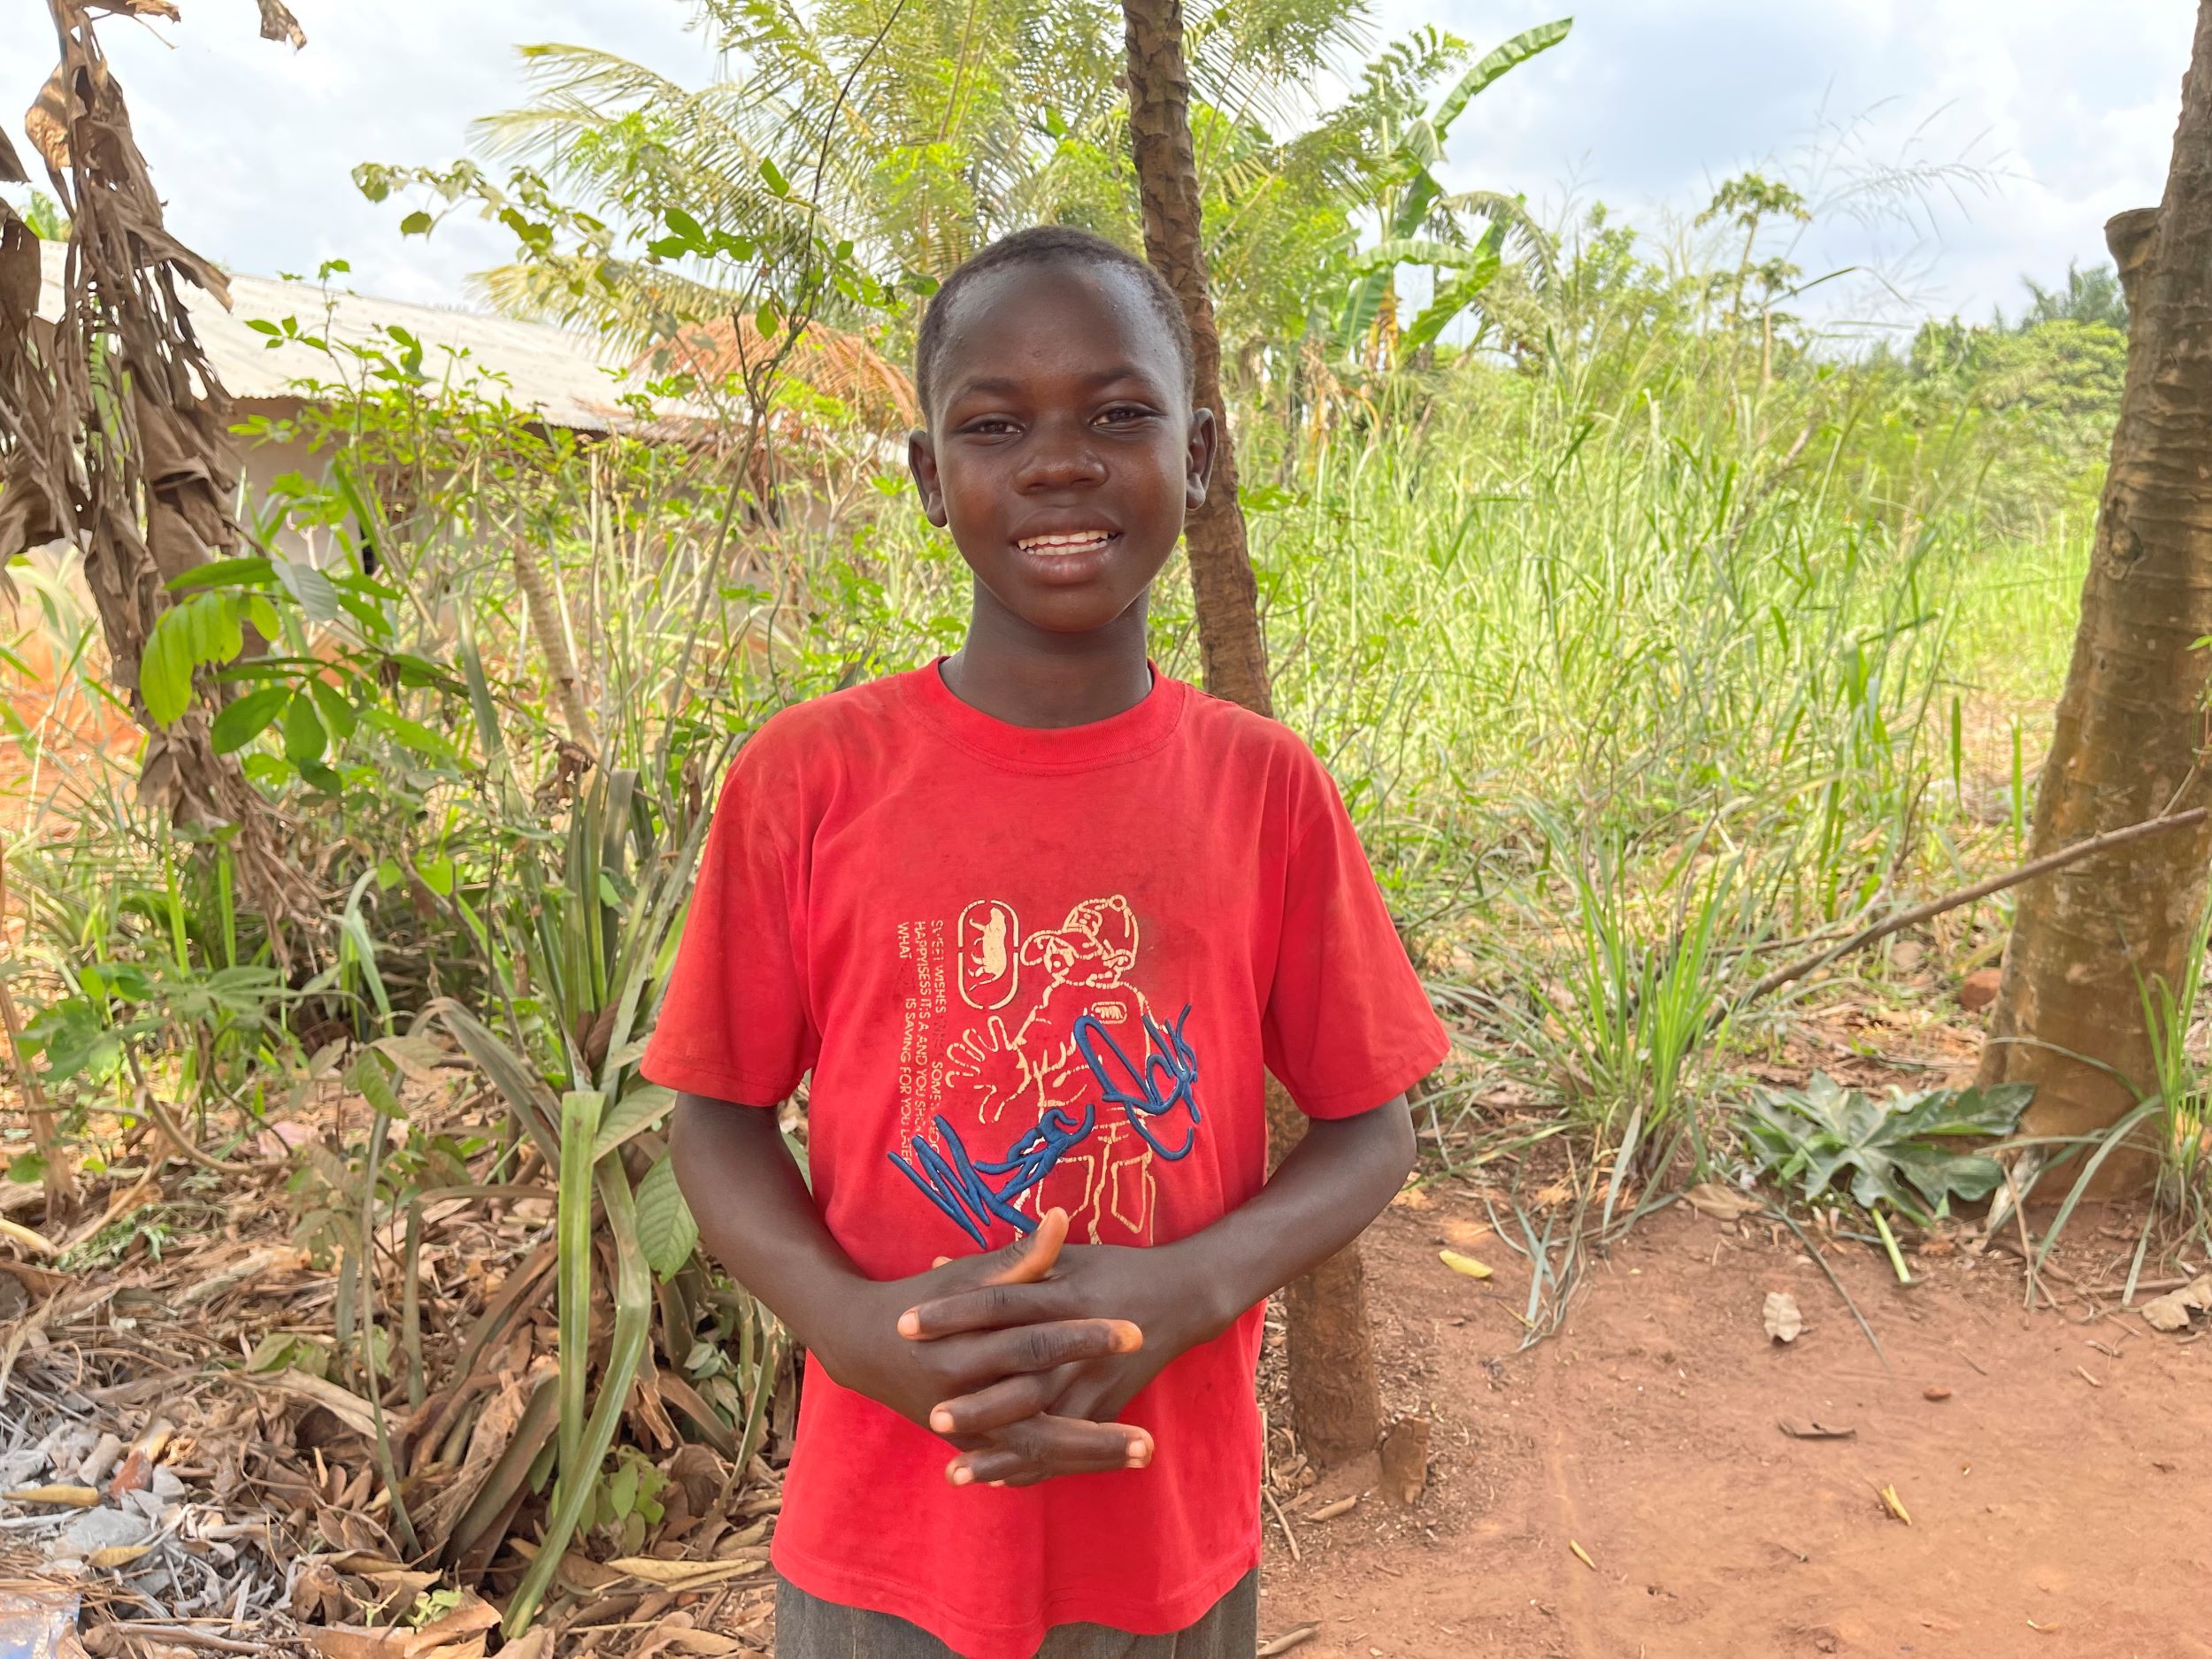 Smiling boy from DRC wearing a bright red t-shirt